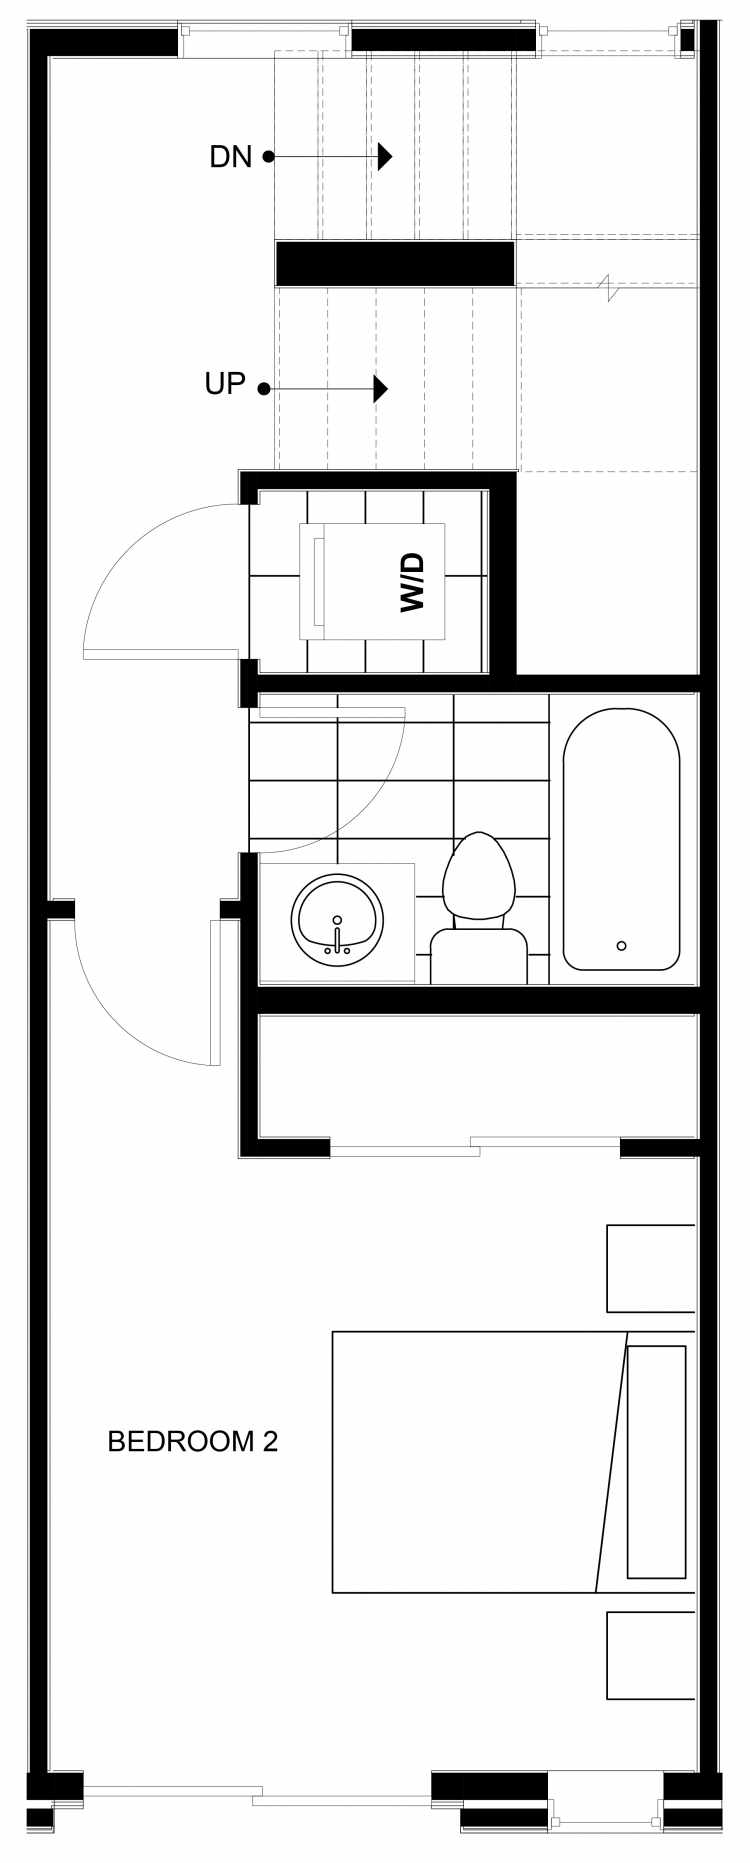 Third Floor Plan of 1540 15th Ave E, One of the Grandview Townhomes in Capitol Hill